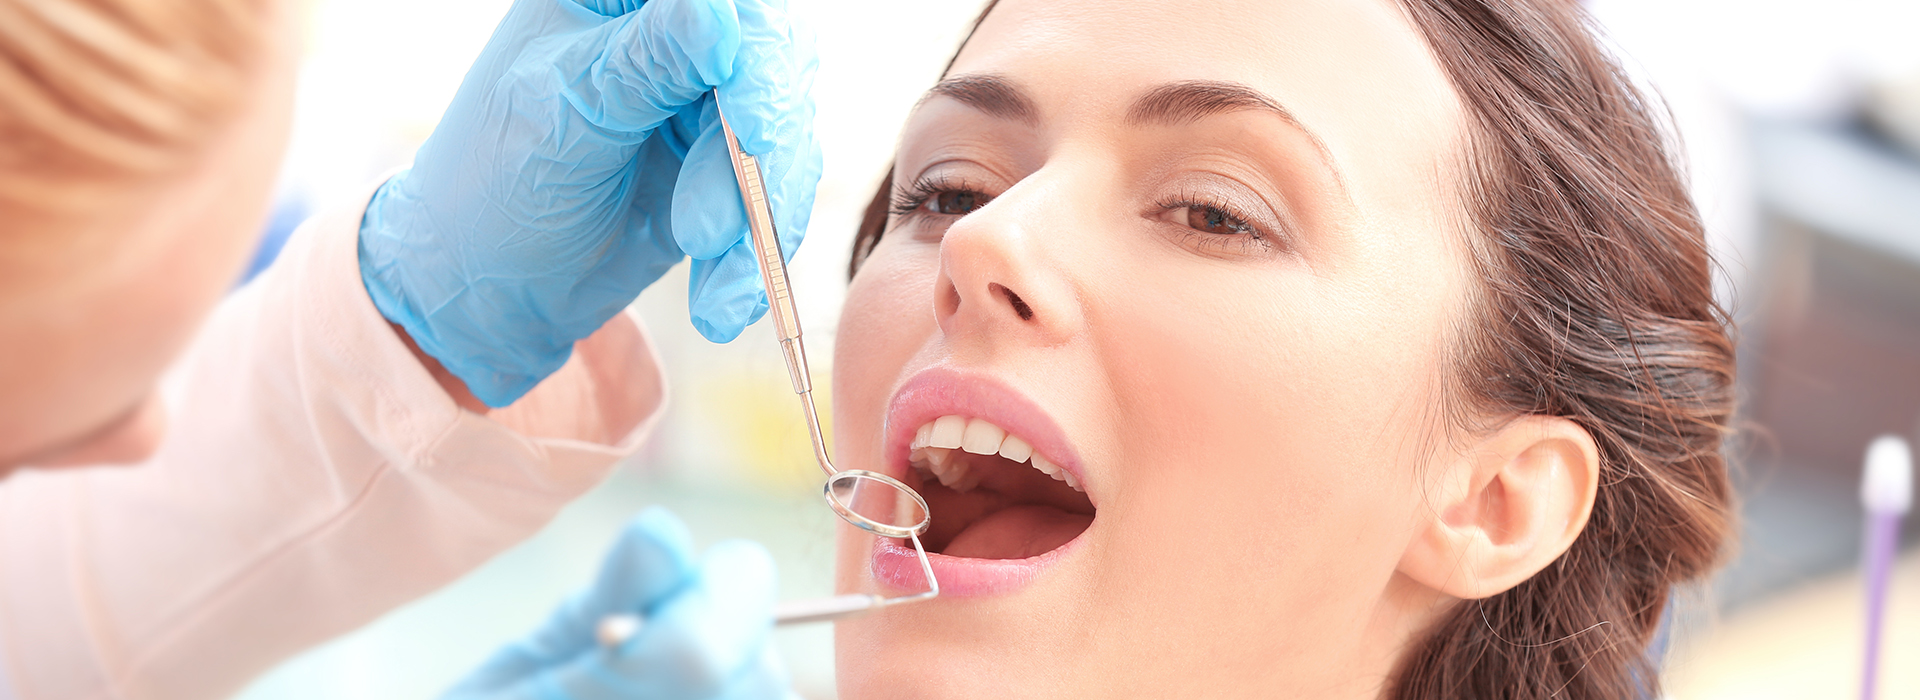 Benecchi Dental Group | Root Canals, Pediatric Dentistry and Veneers